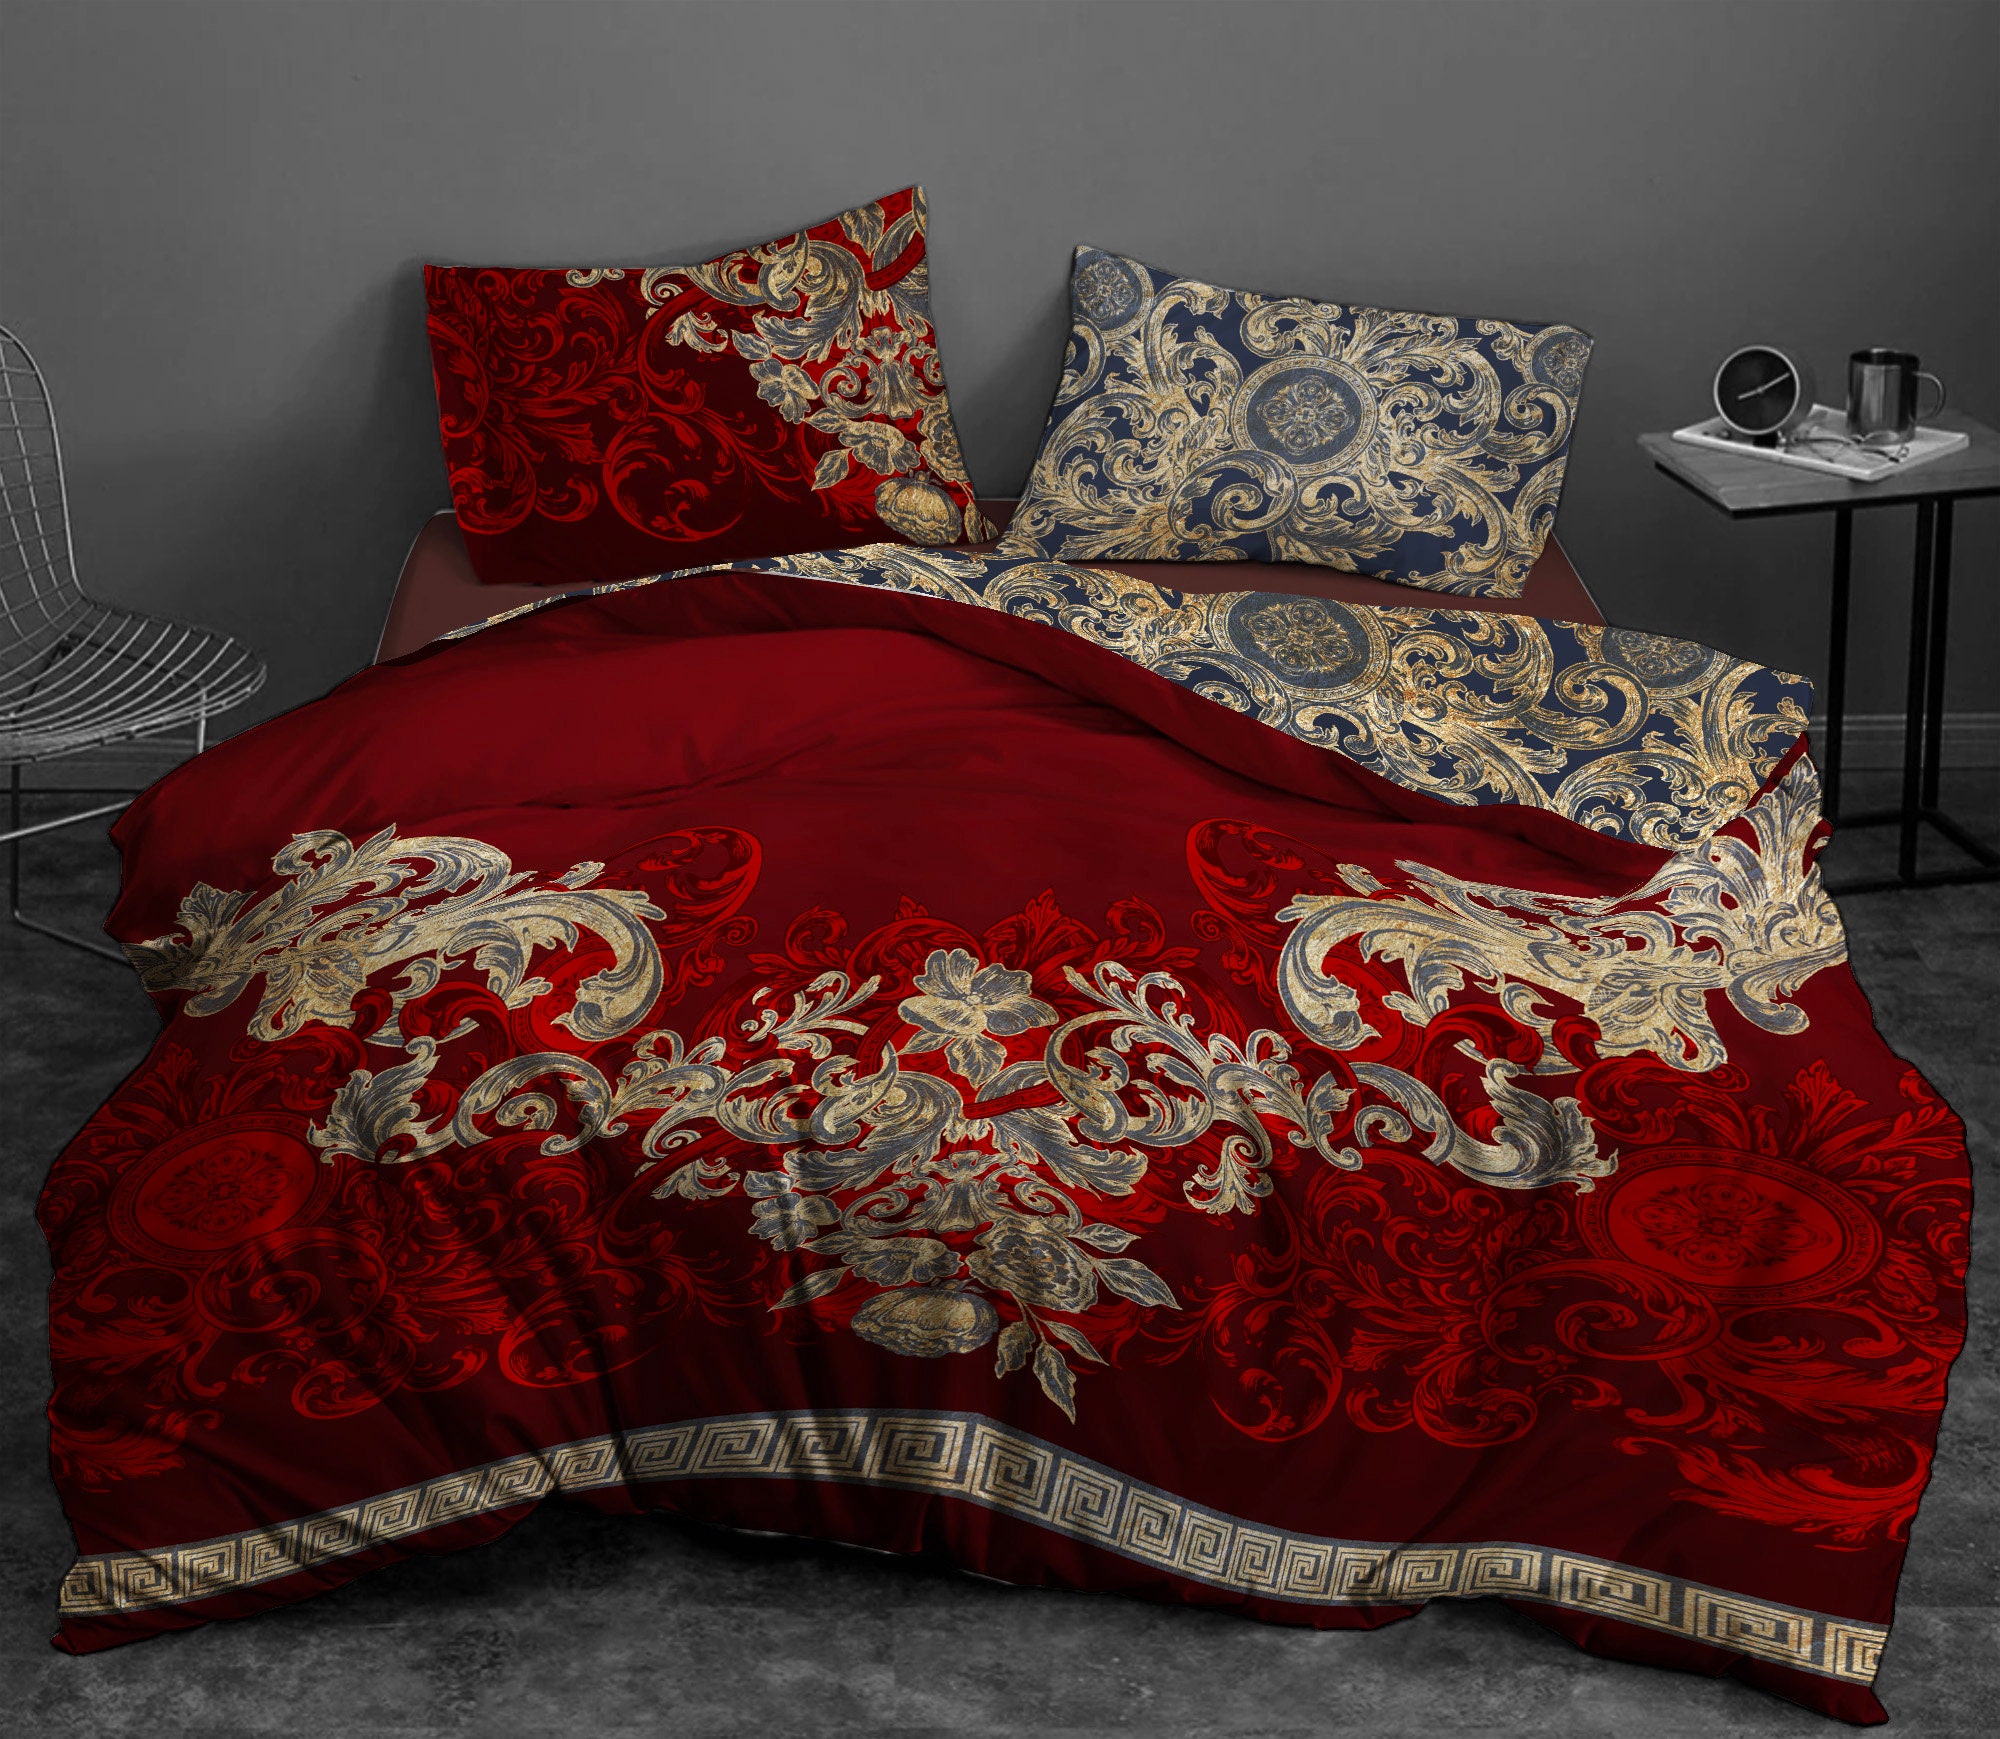 Buy Louis Vuitton Bed Sheets Online In India -  India